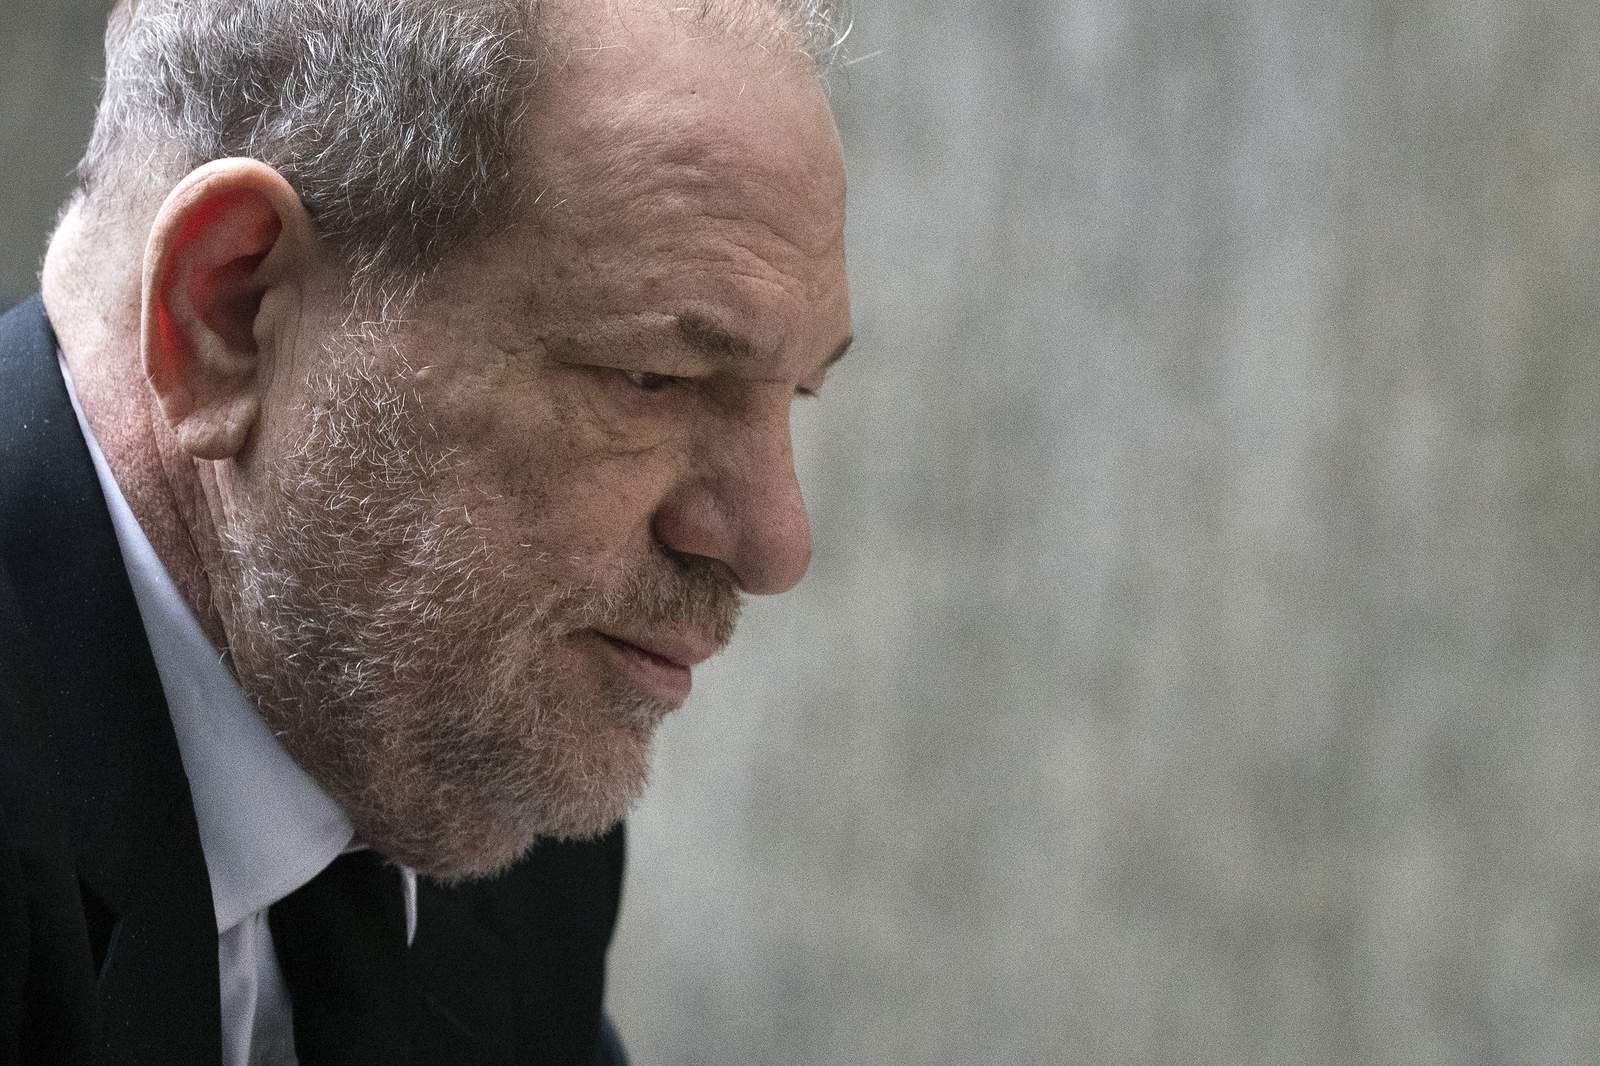 From #MeToo to trial: A look at the fall of Harvey Weinstein